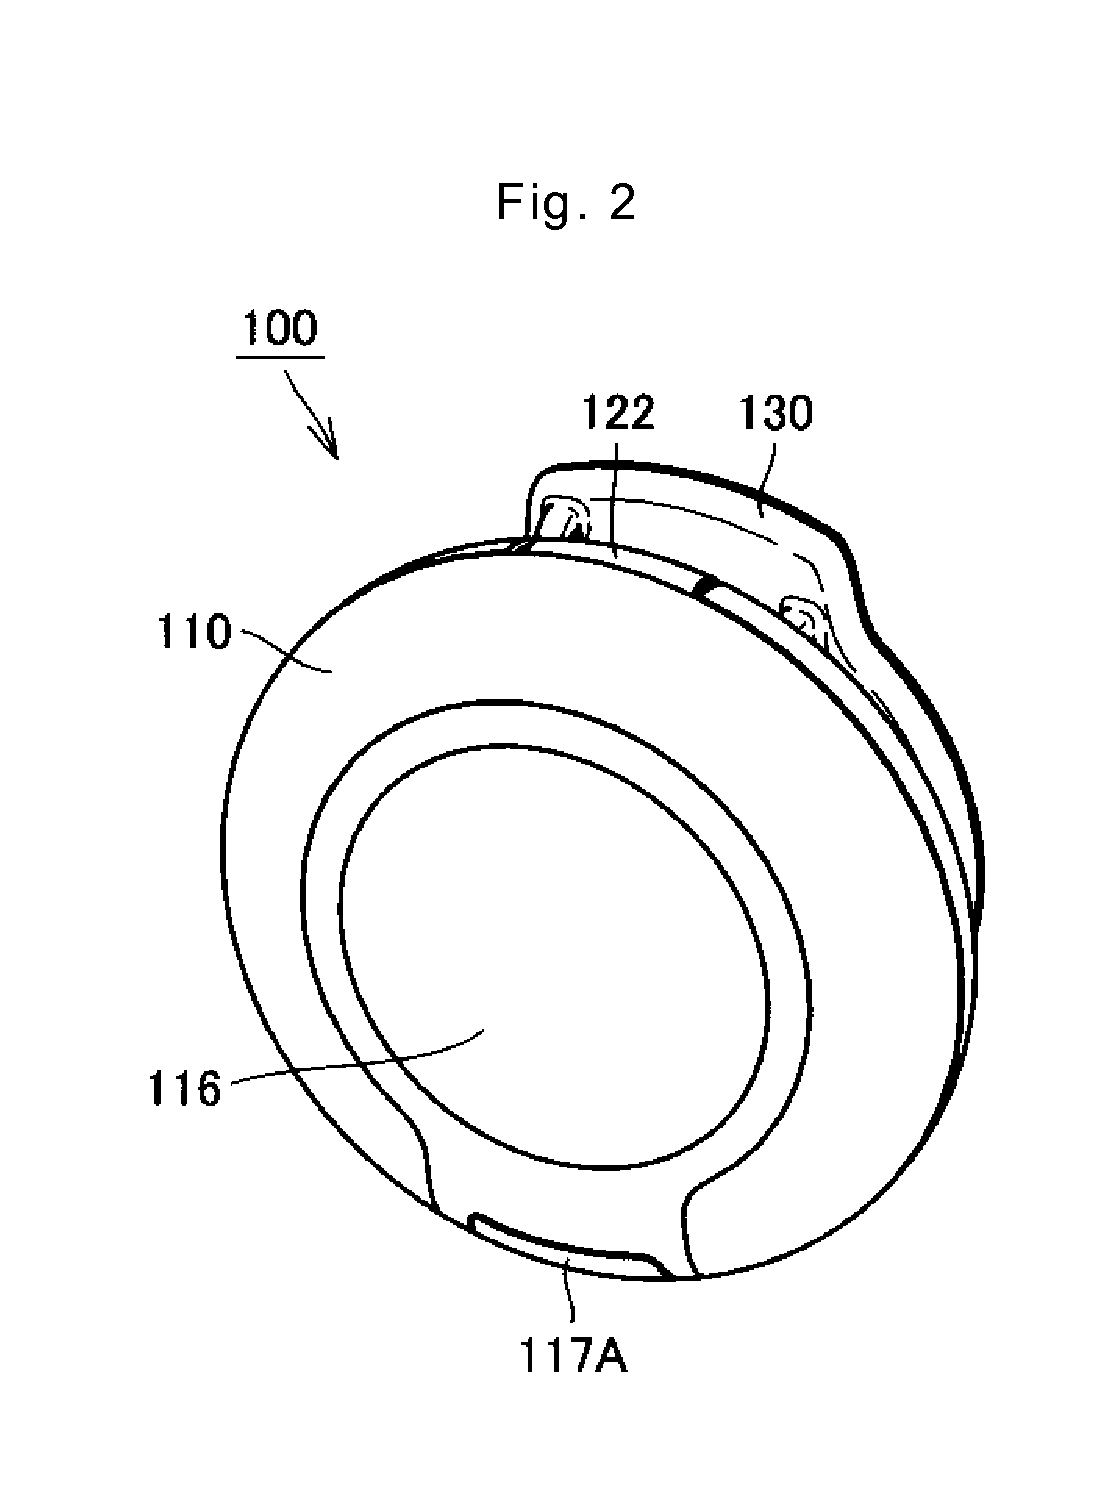 Body motion detection device having fewer number of switches necessary for a setting operation